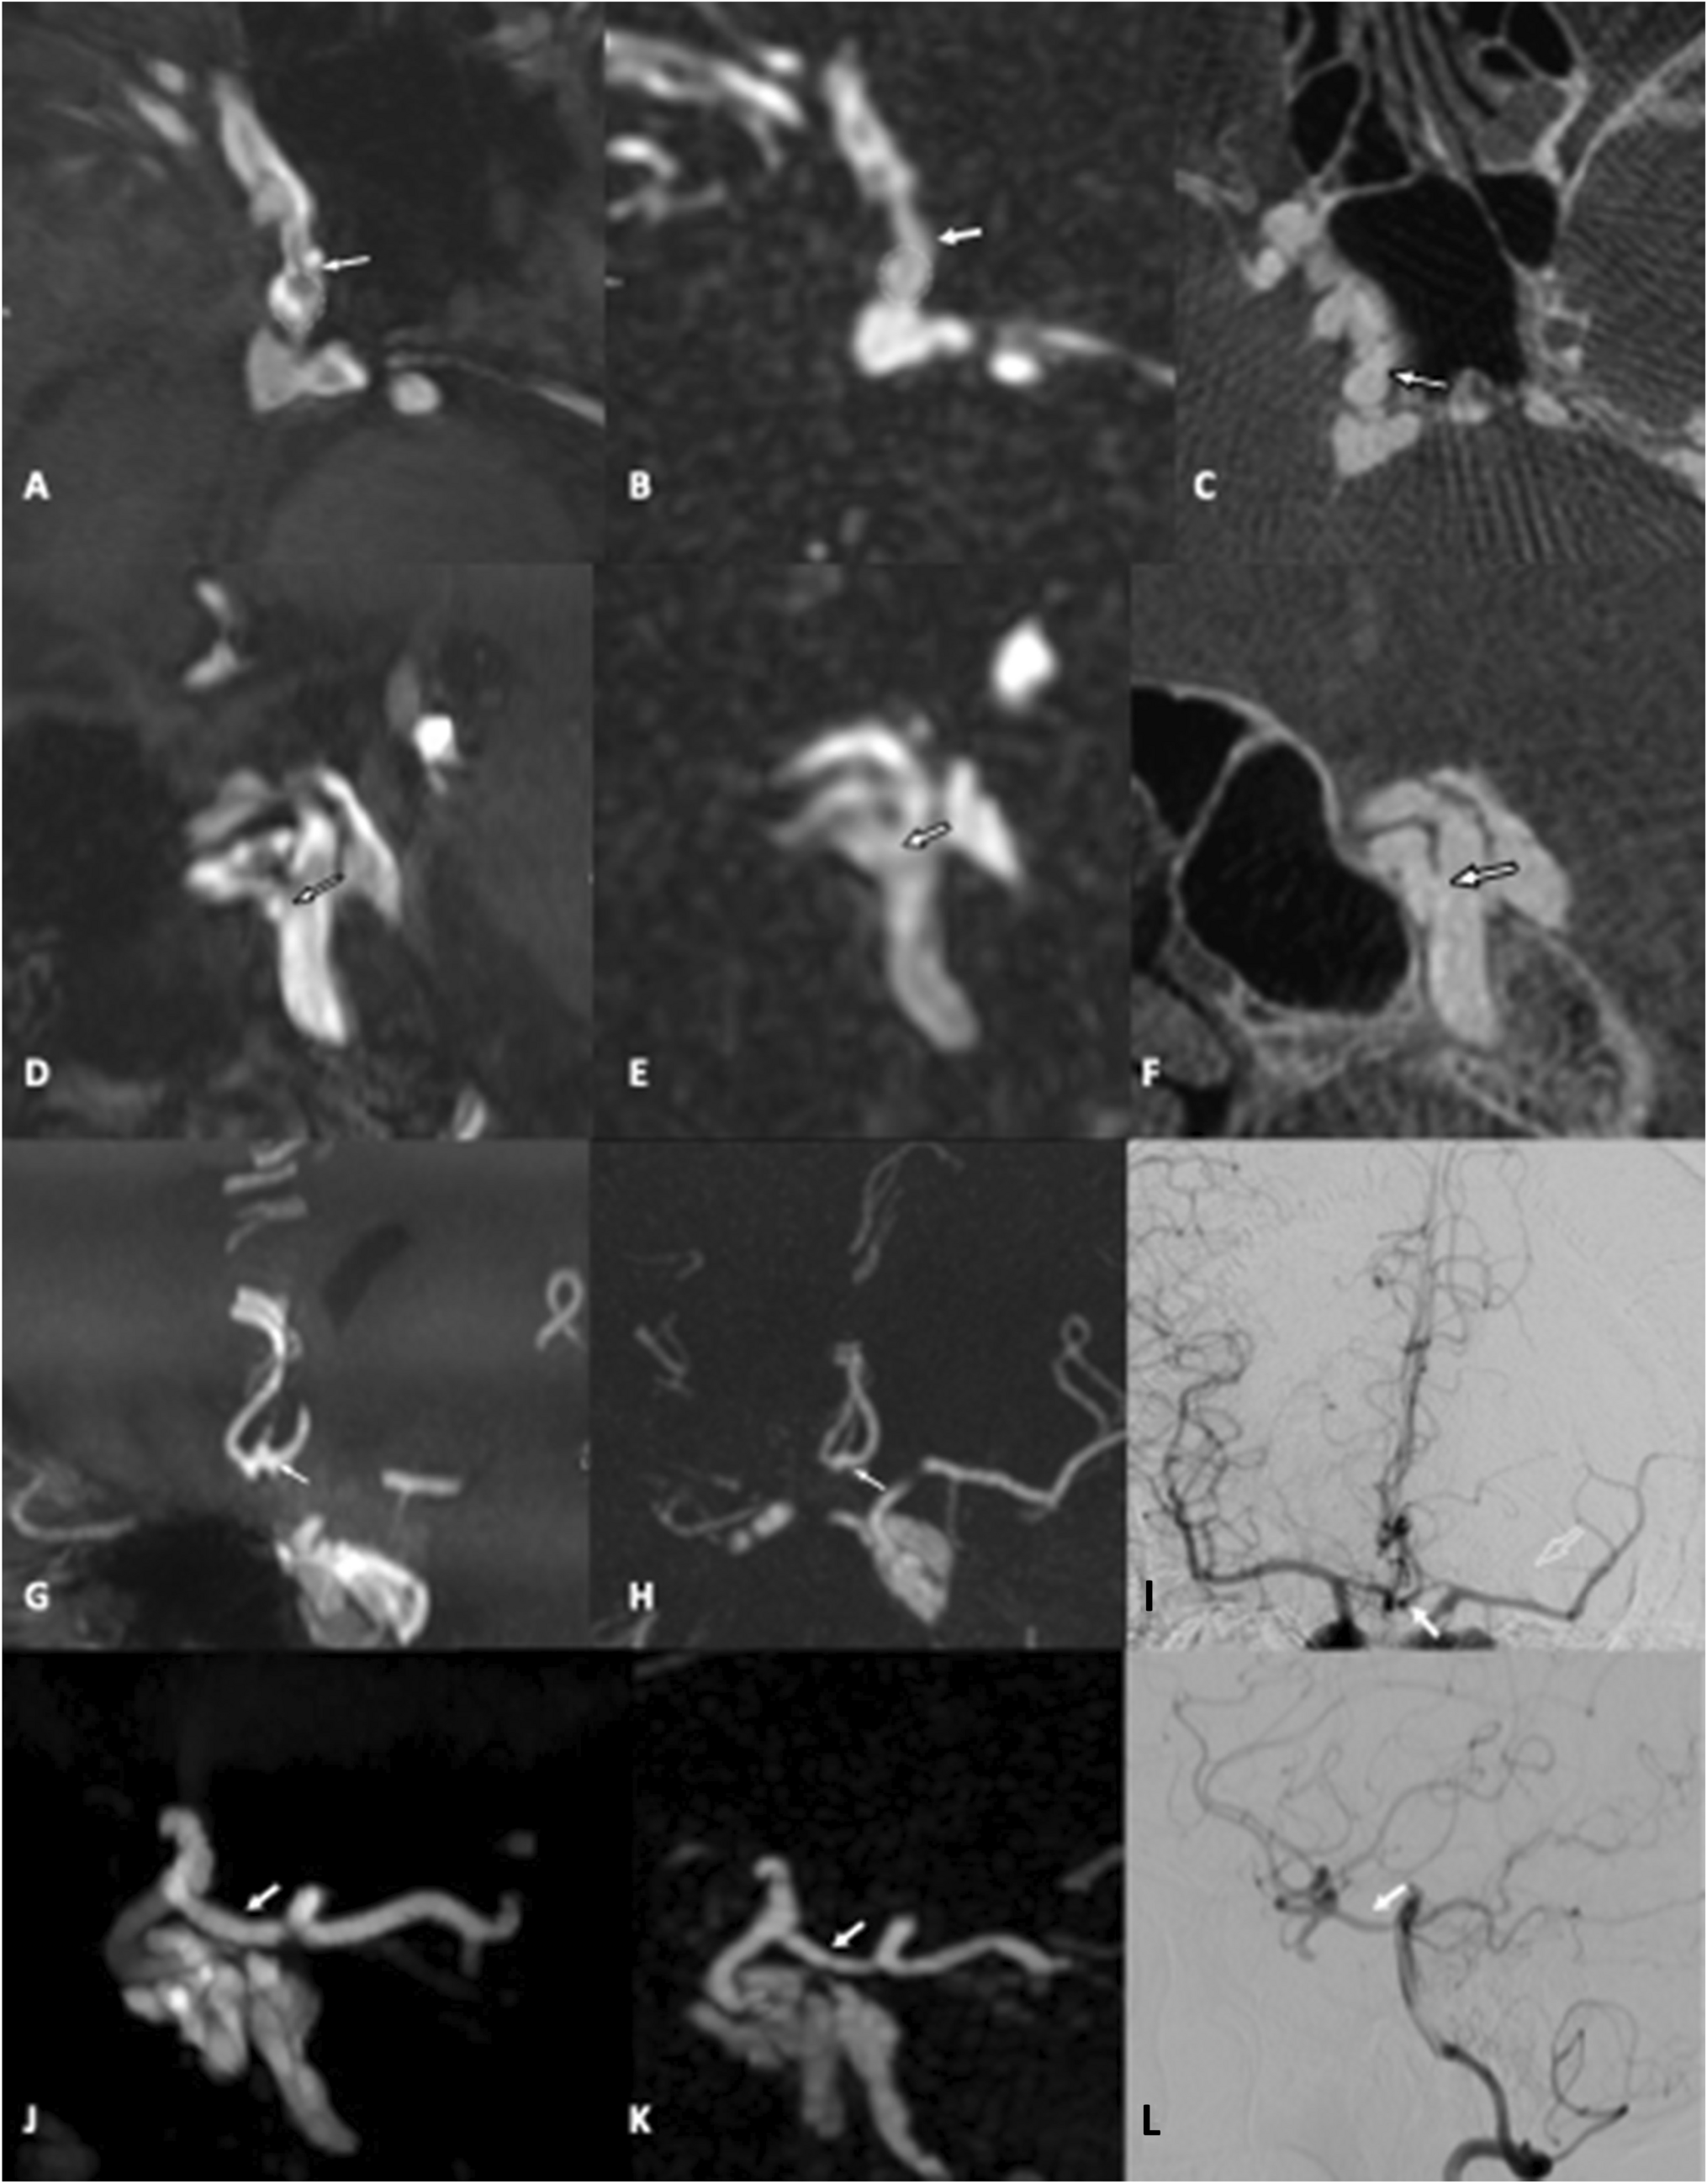 Evaluating the diagnostic performance of non-contrast magnetic resonance angiography sequences in the pre-procedural comprehensive analysis of direct carotid cavernous fistula